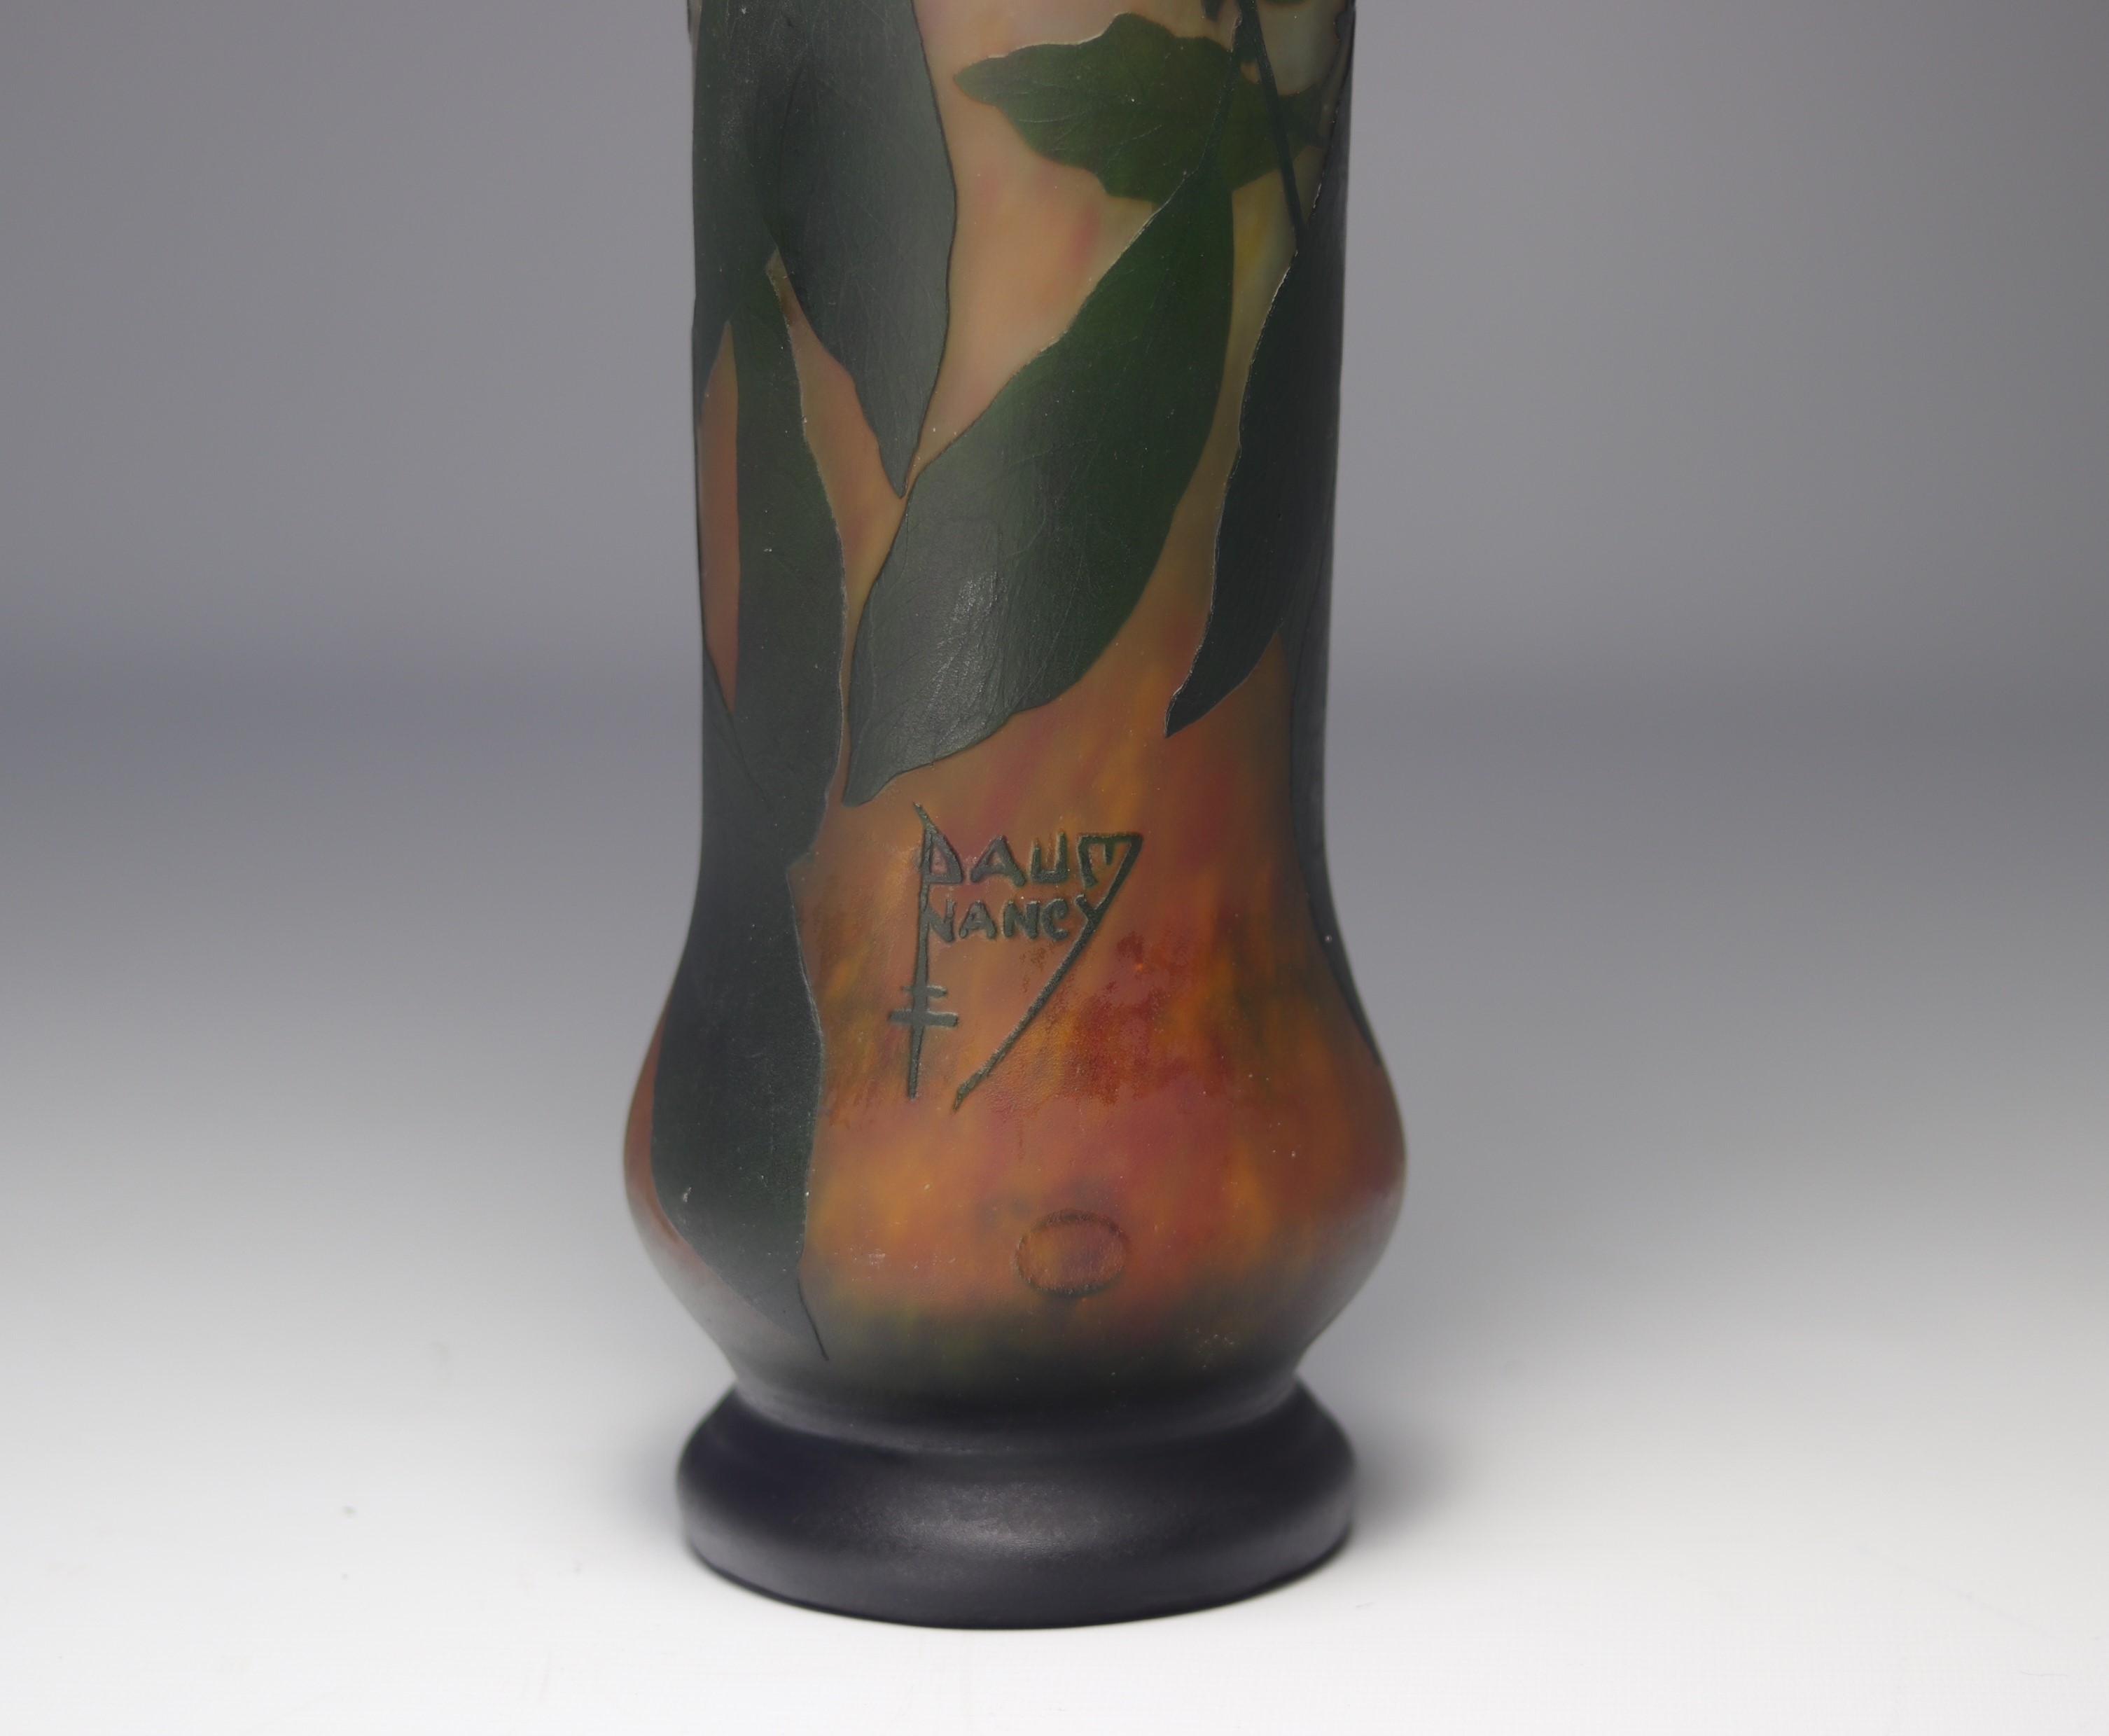 Daum Nancy multi-layered glass vase decorated with khaki on a green and orange mottled background - Image 4 of 4